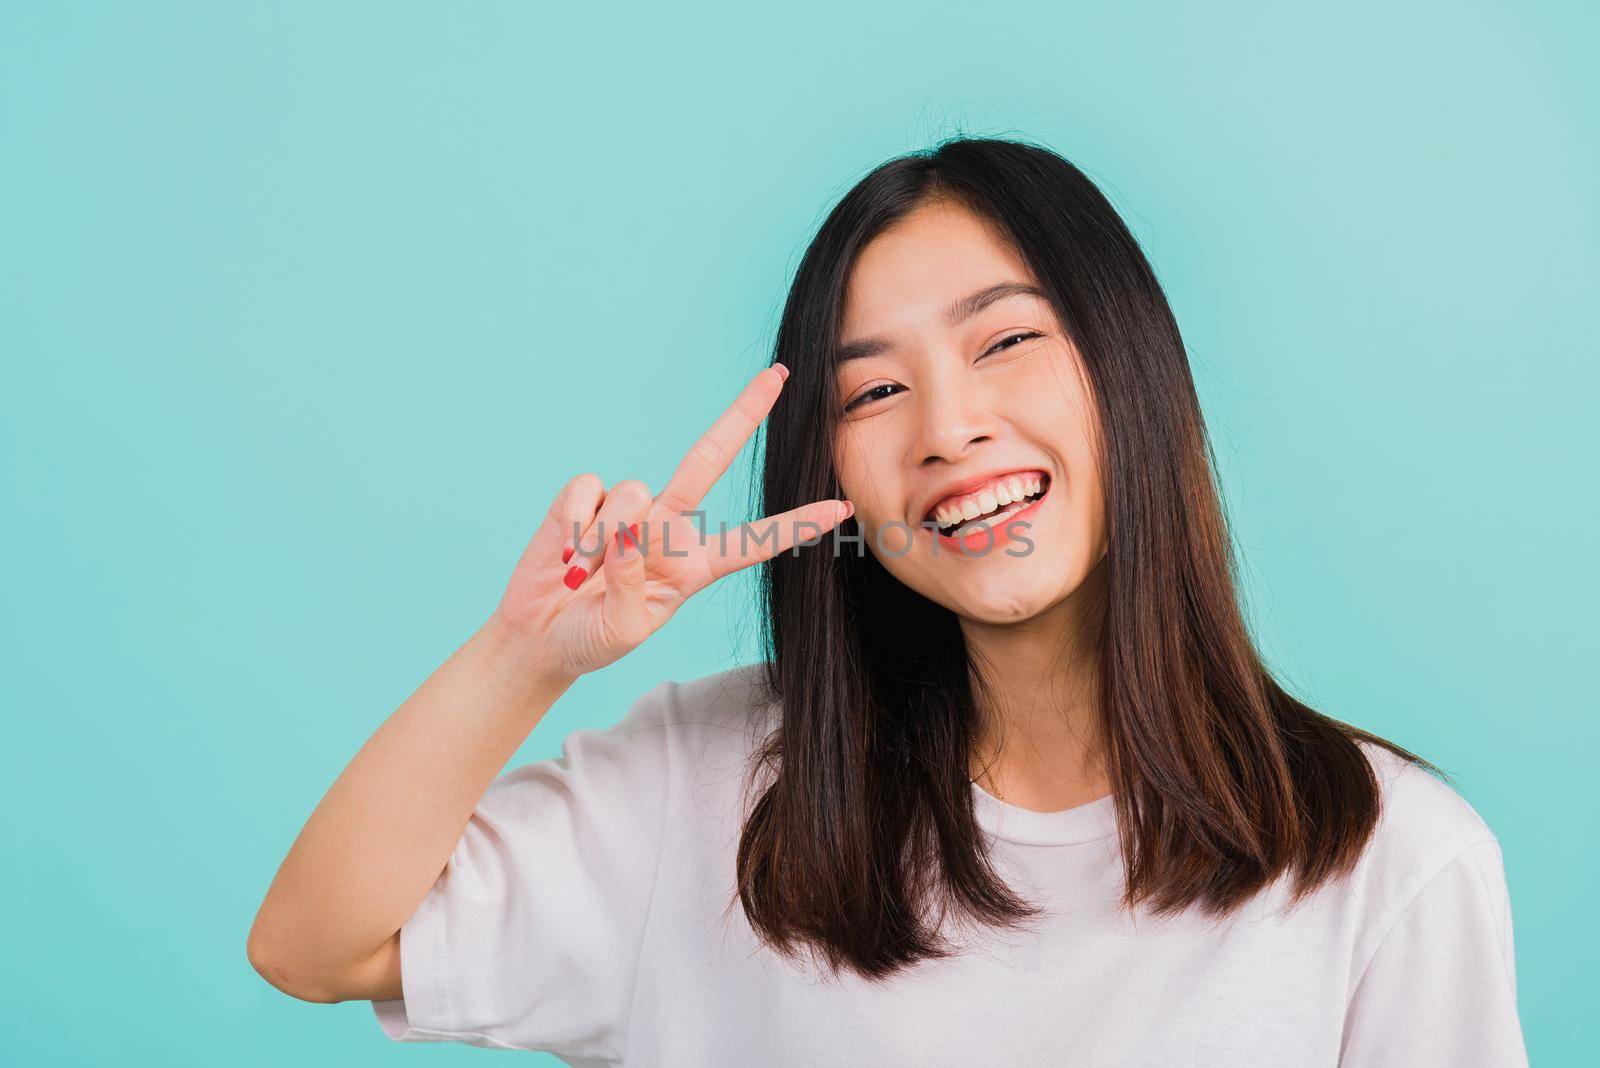 Asian happy portrait beautiful cute young woman teen smile standing wear t-shirt showing finger making v-sign symbol near eye looking to camera isolated, studio shot blue background with copy space